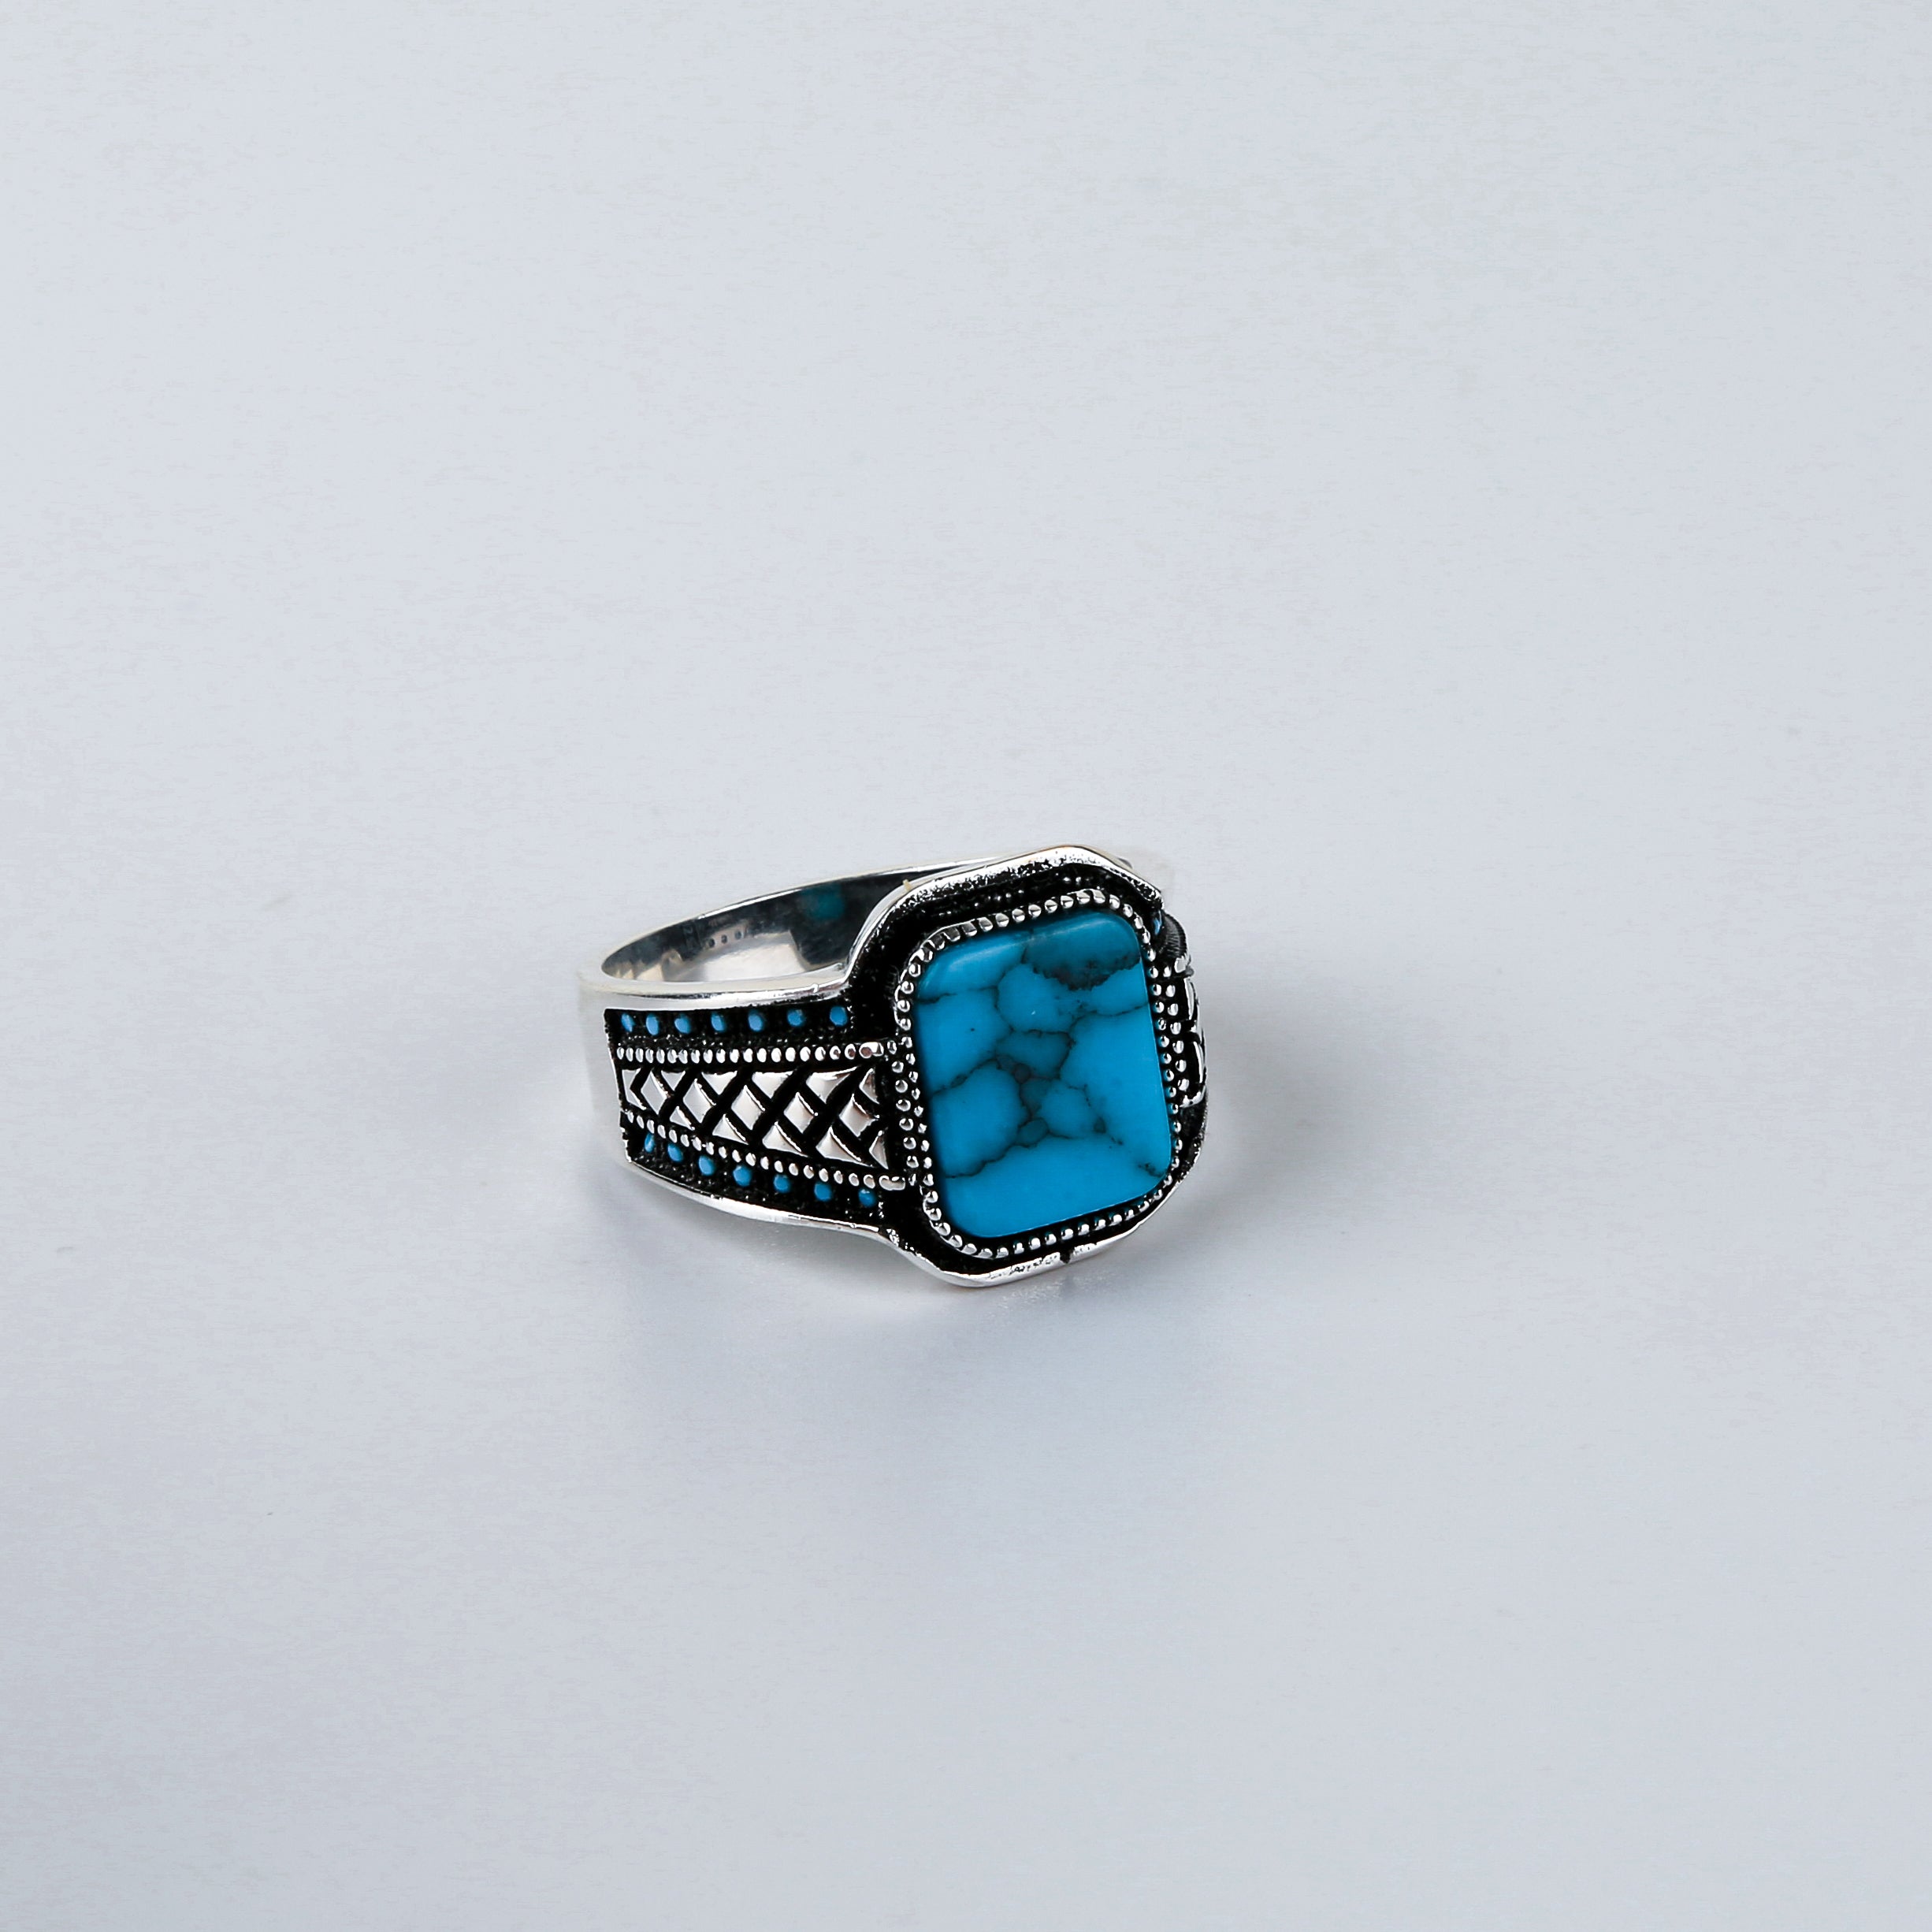 Men's Vintage Turquoise Ring, Navajo Rings, Real Turquoise Signet Ring,  Large Sterling Silver Square Signet Ring, Boho Turquoise Stone Ring - Etsy